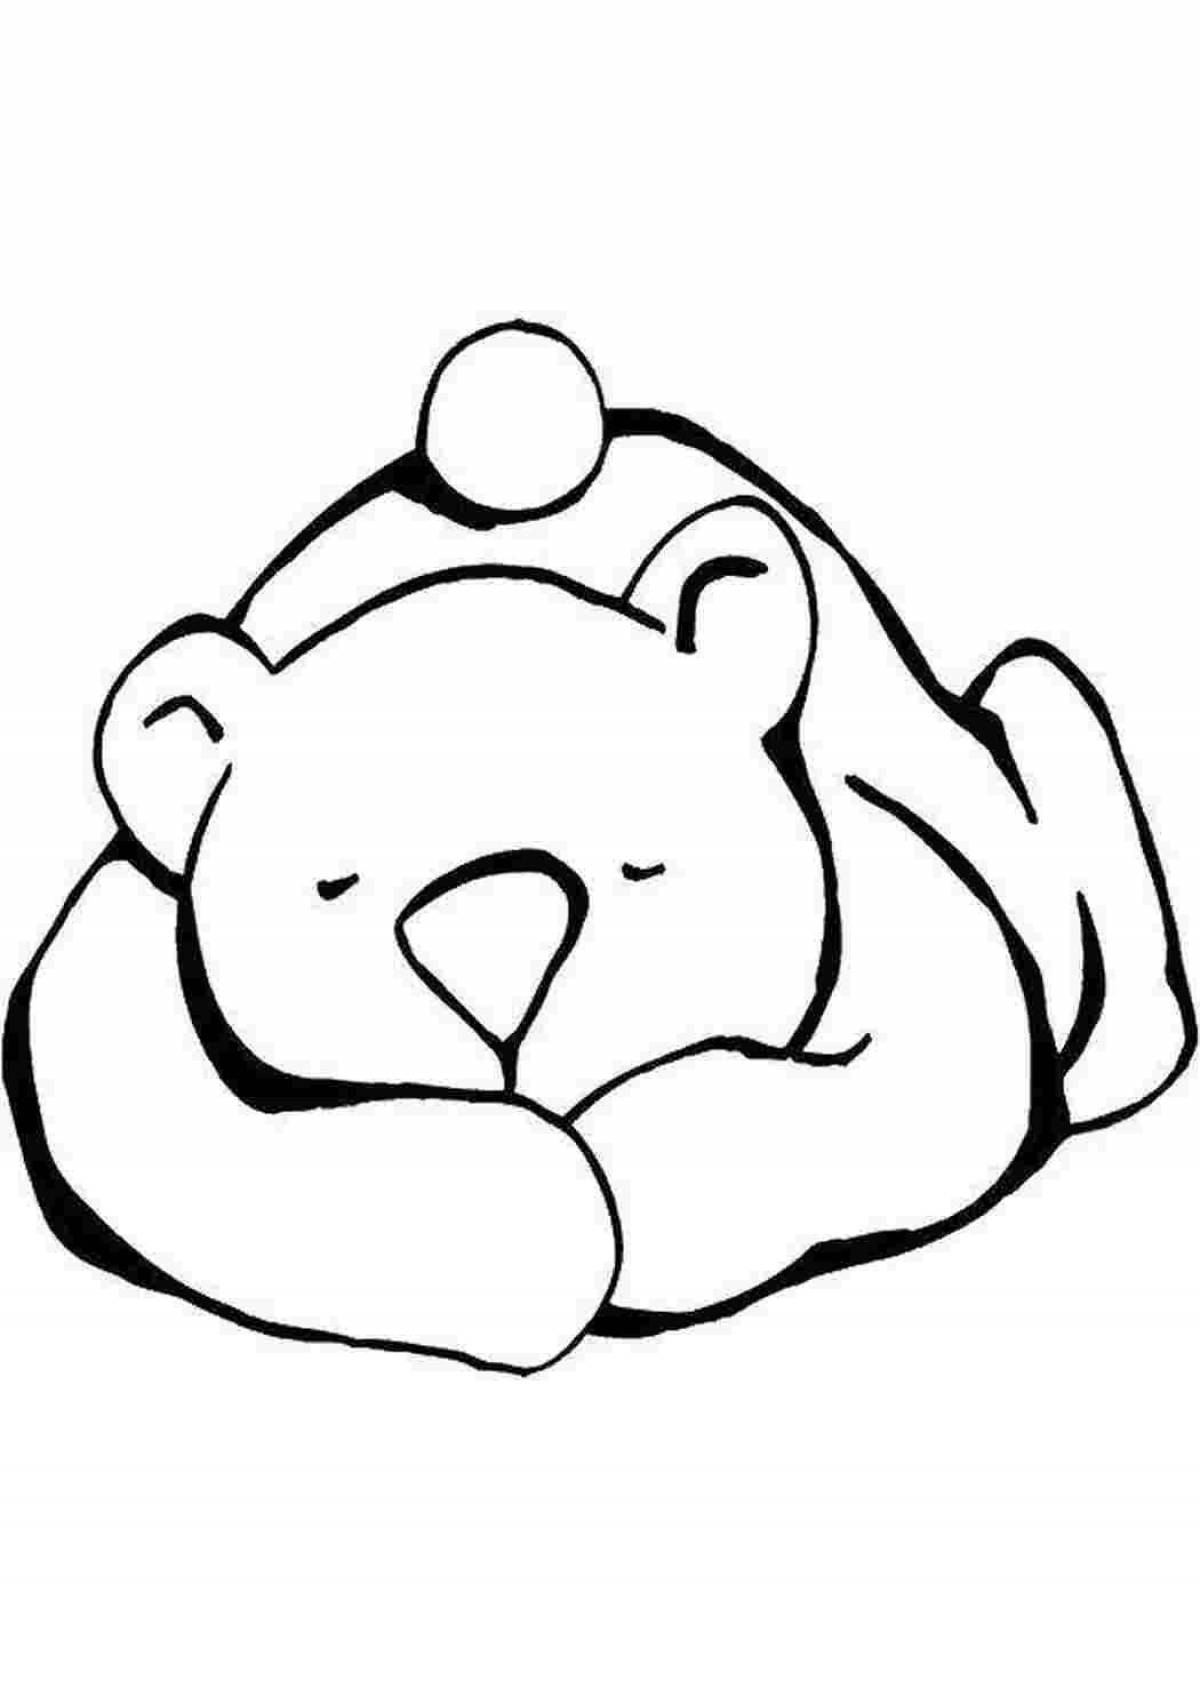 Exciting bear coloring page